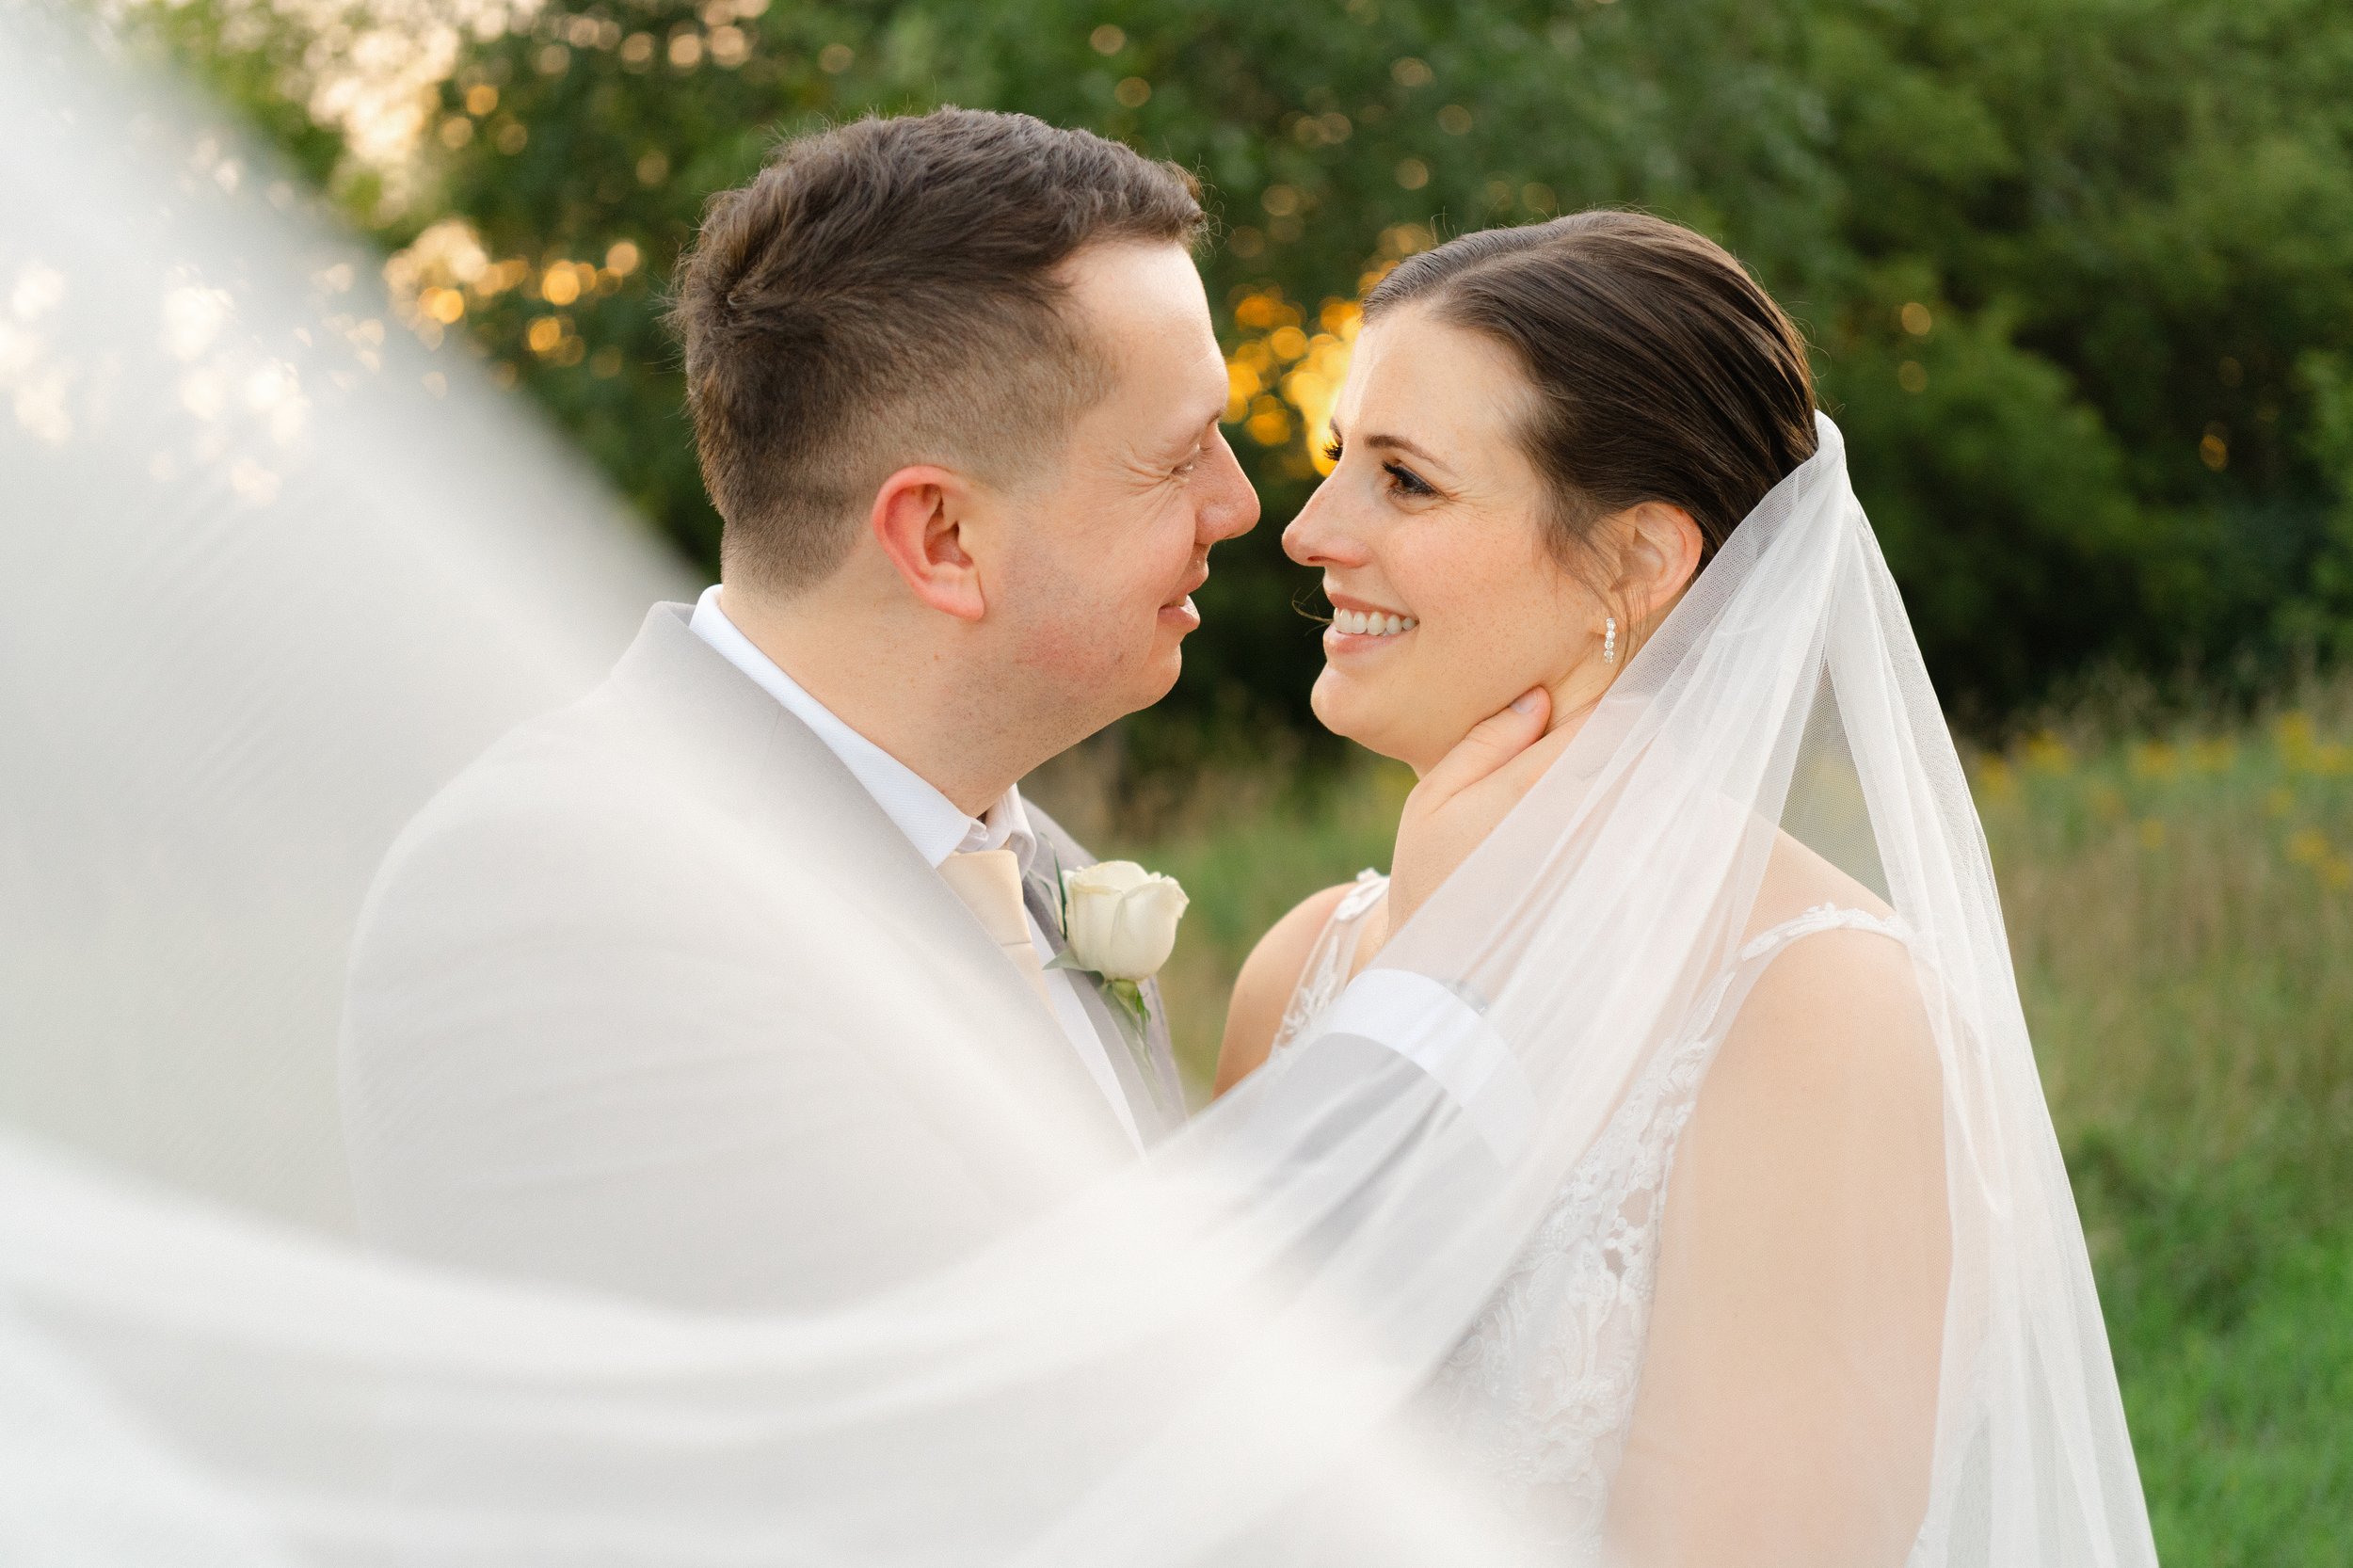 Using the brides veil as a prop can elevate any photo to the next level